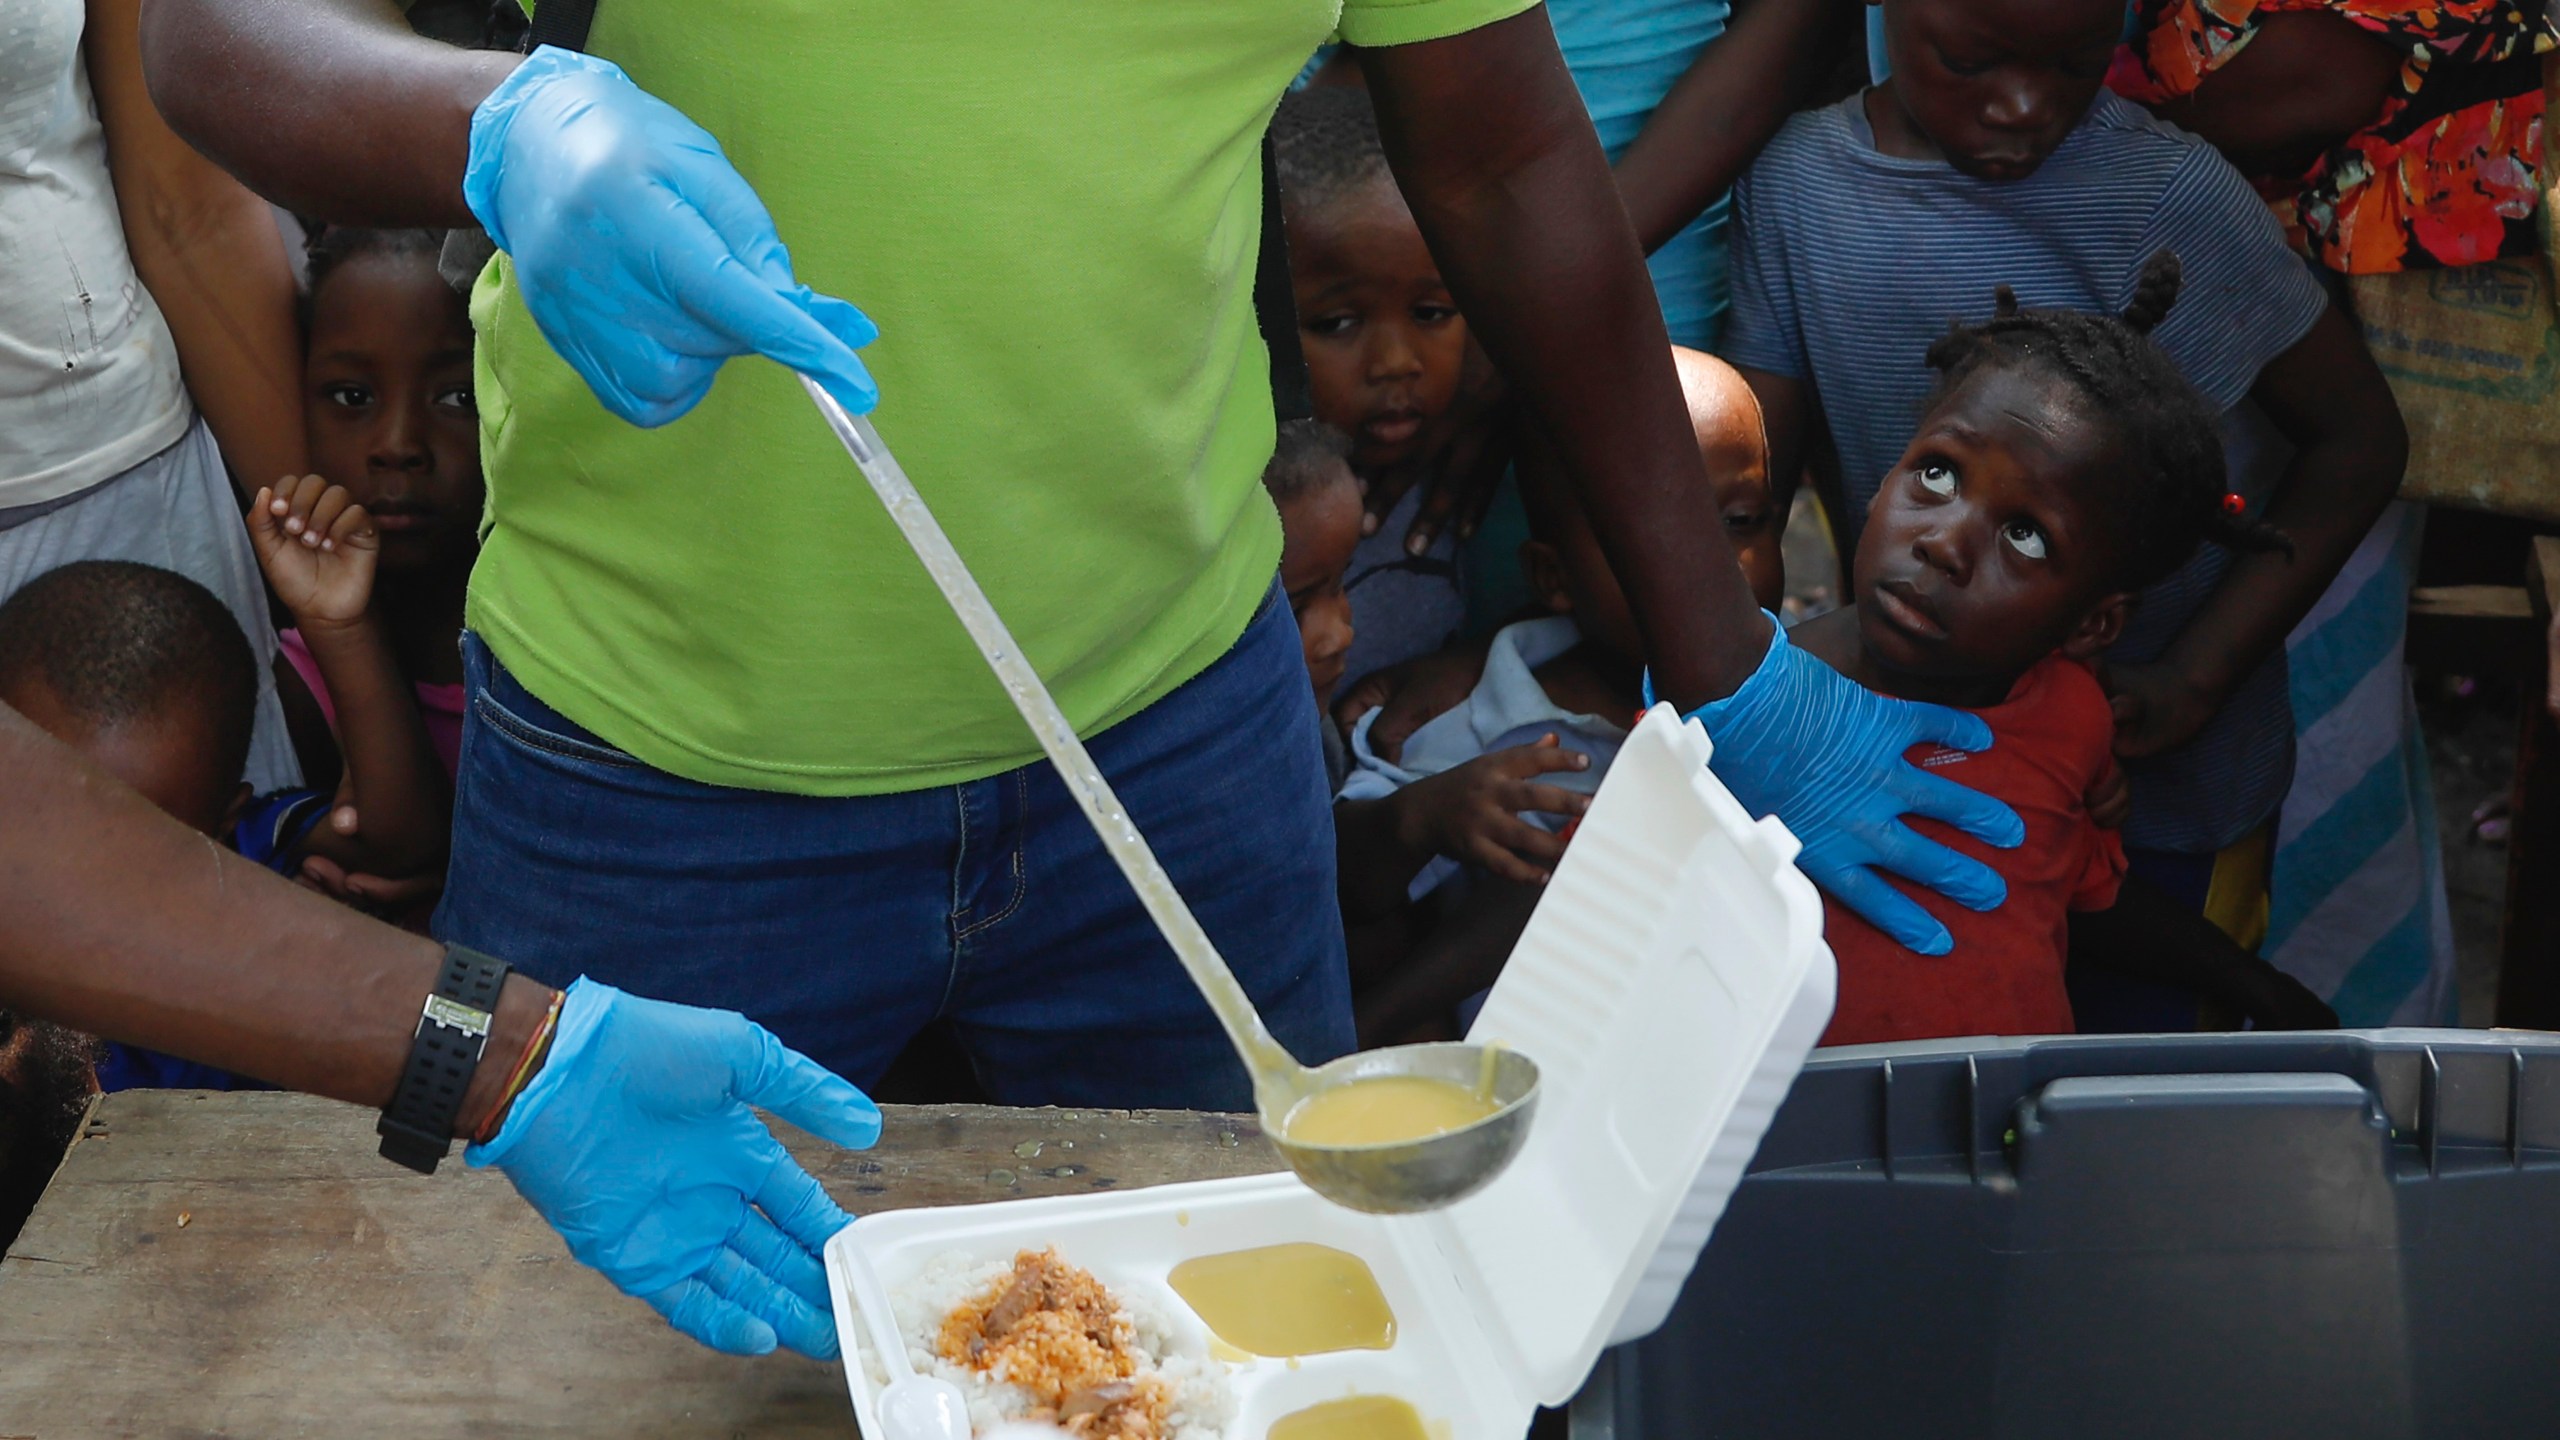 FILE - A server ladles soup into a container as children line up to receive food at a shelter for families displaced by gang violence, in Port-au-Prince, Haiti, March 14, 2024. Gang violence in Haiti has displaced over 300,000 children since March, according to a new report from the U.N. children's agency released late Tuesday, July 2, as the Caribbean country struggles to curb killings and kidnappings. (AP Photo/Odelyn Joseph, File)